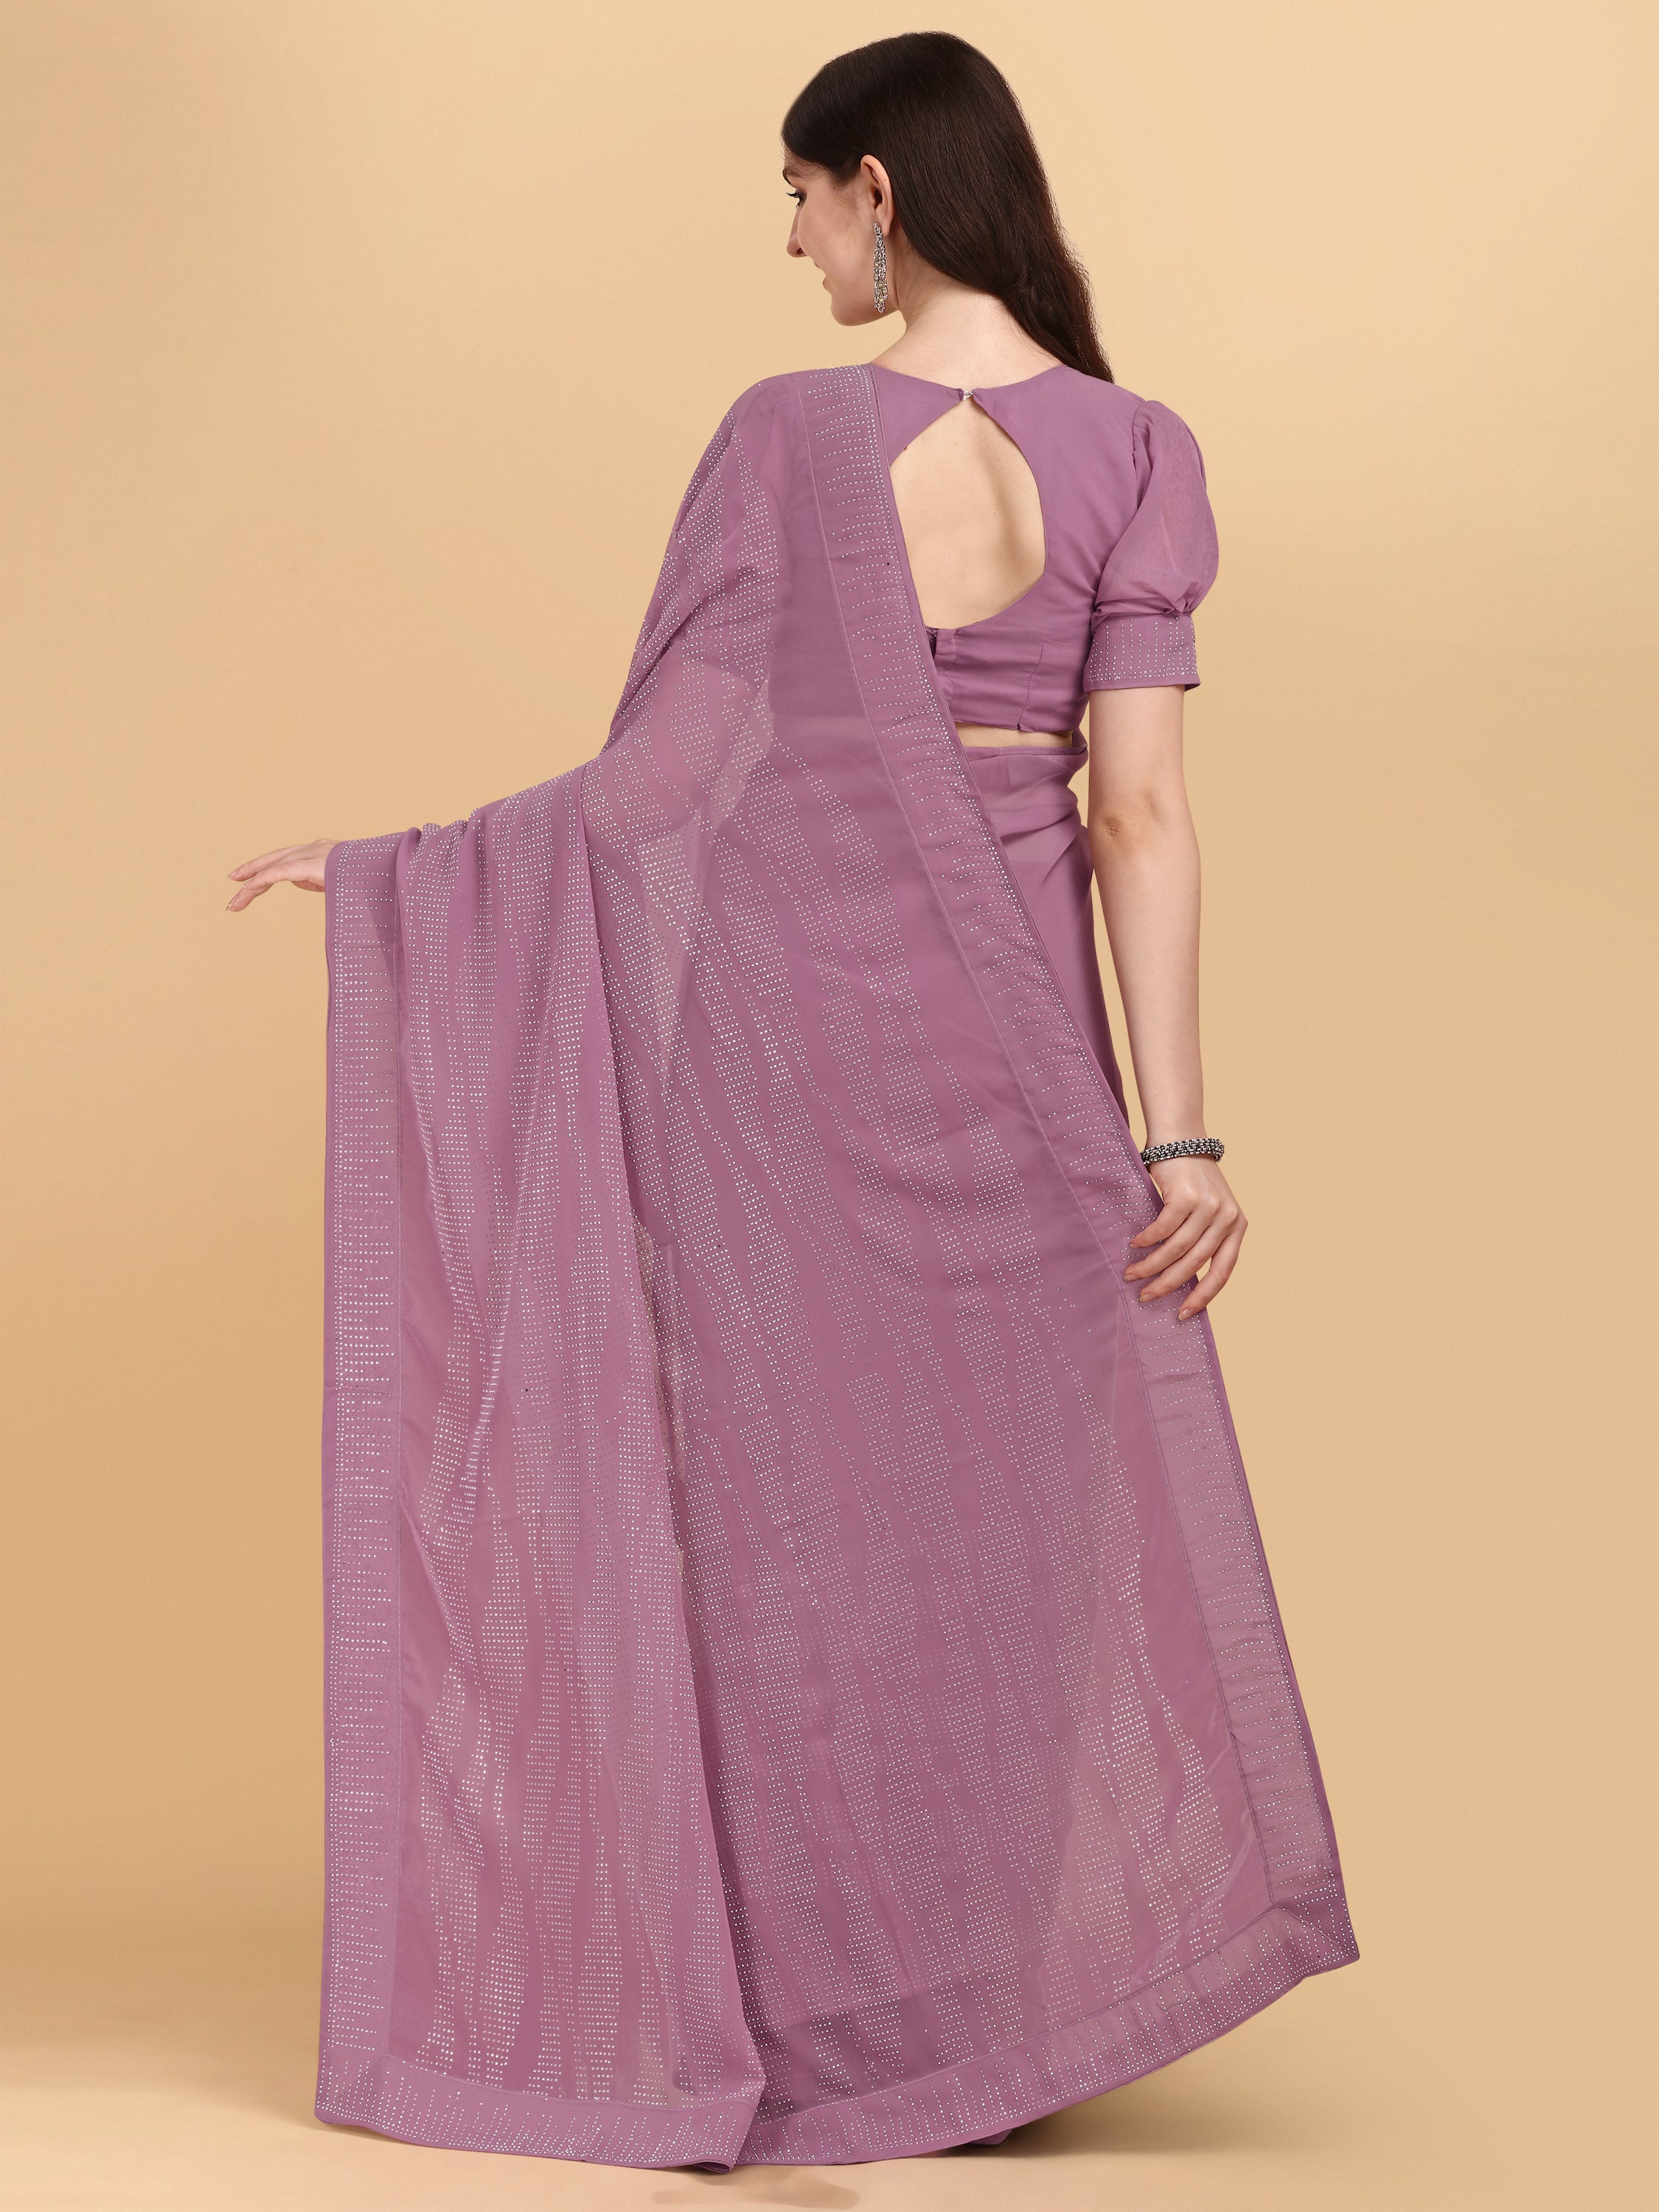 Women's Emblishment Occasion Wear Georgette Saree With Blouse Piece (Light Violet) - NIMIDHYA